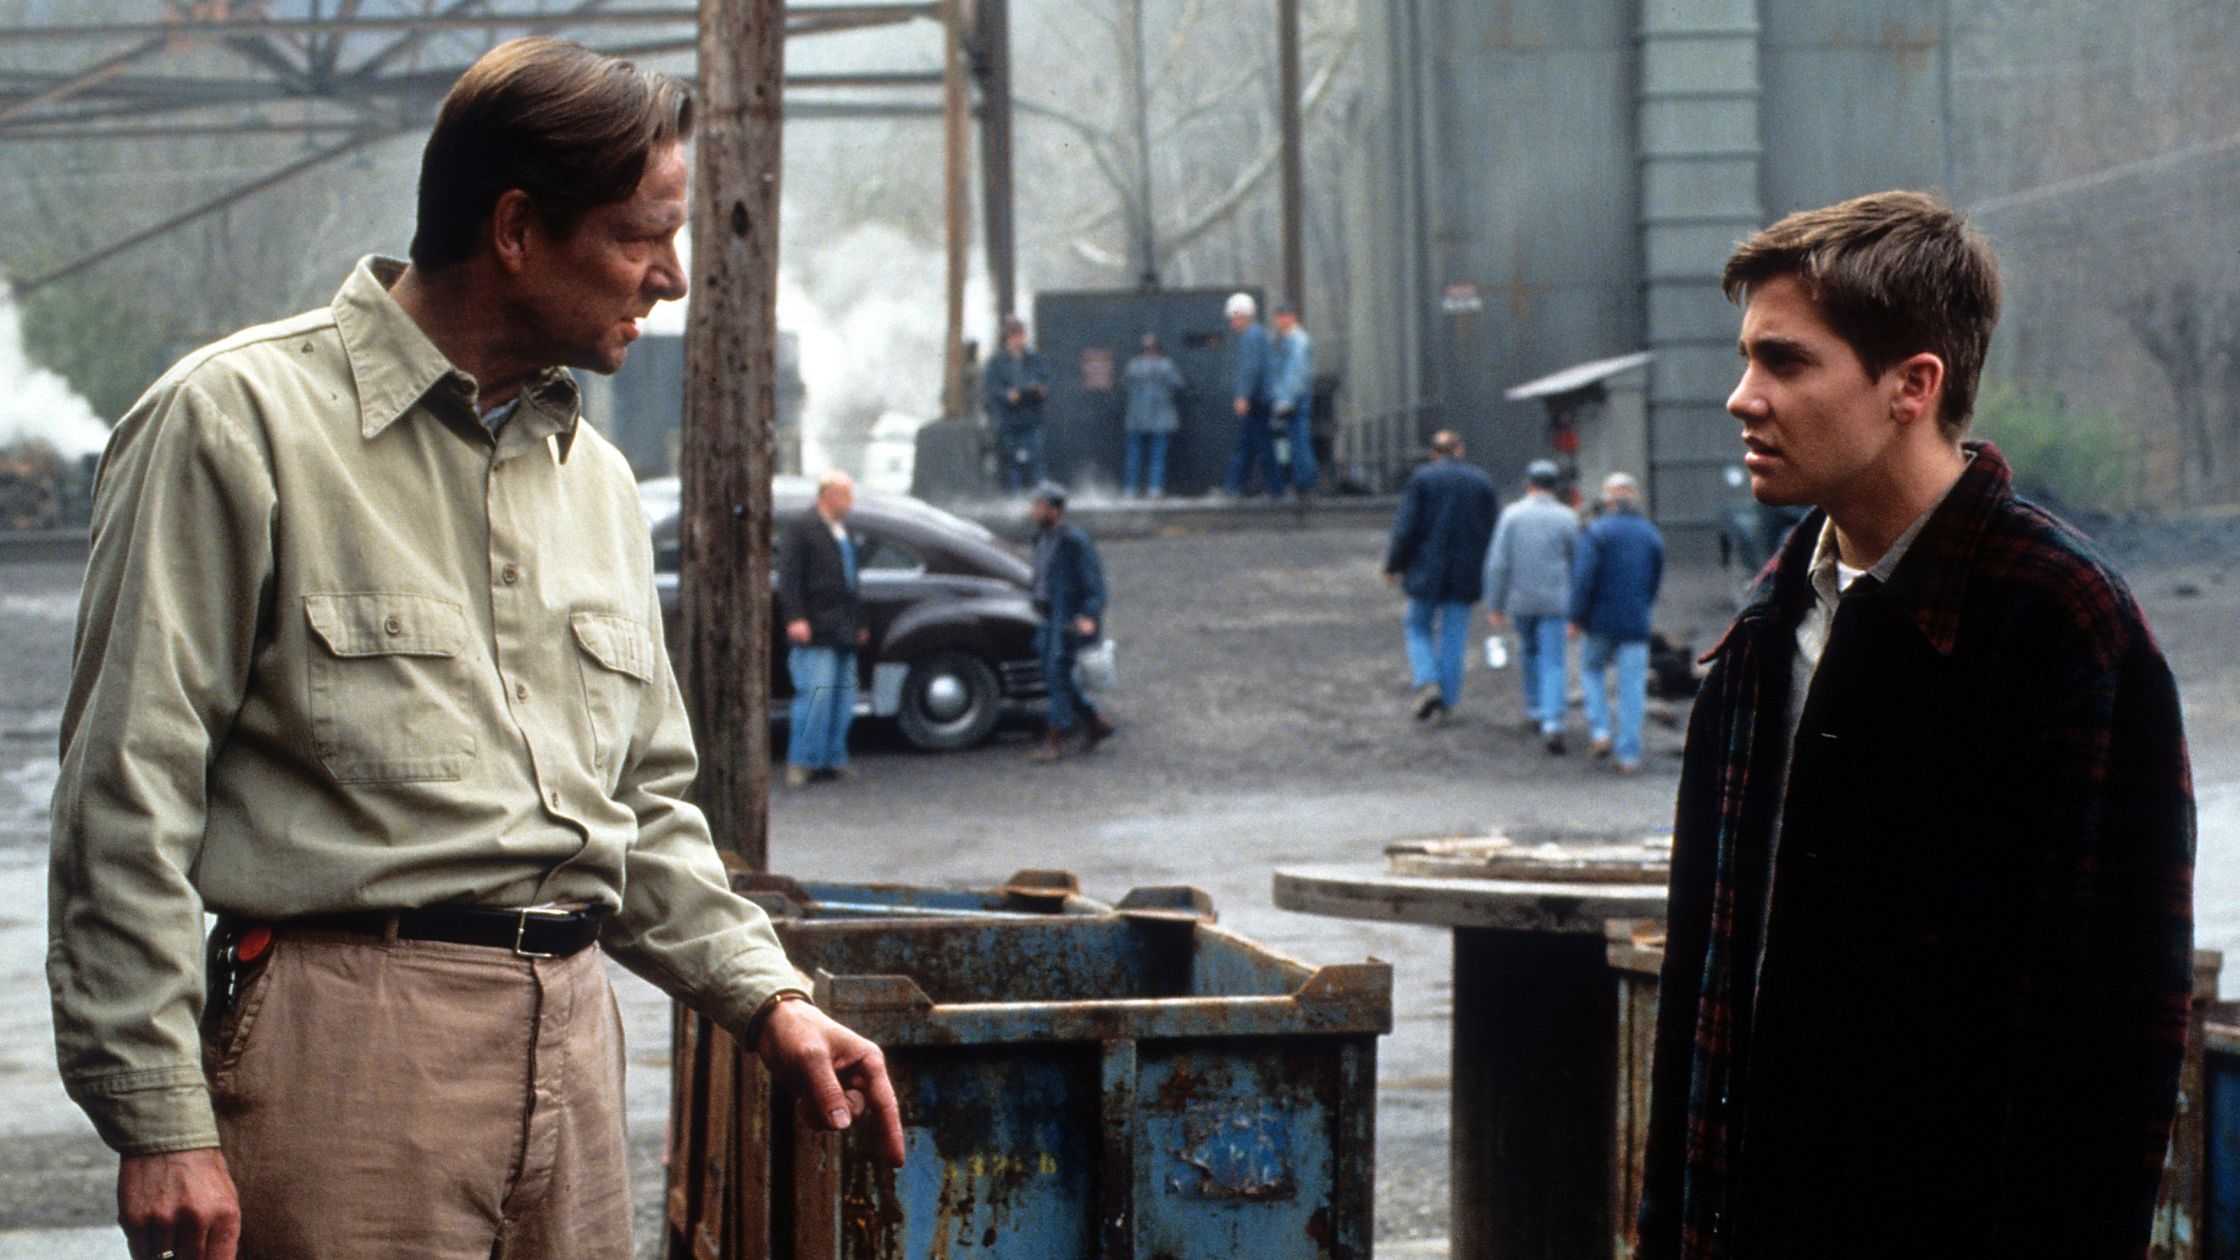 A scene from the film October Sky